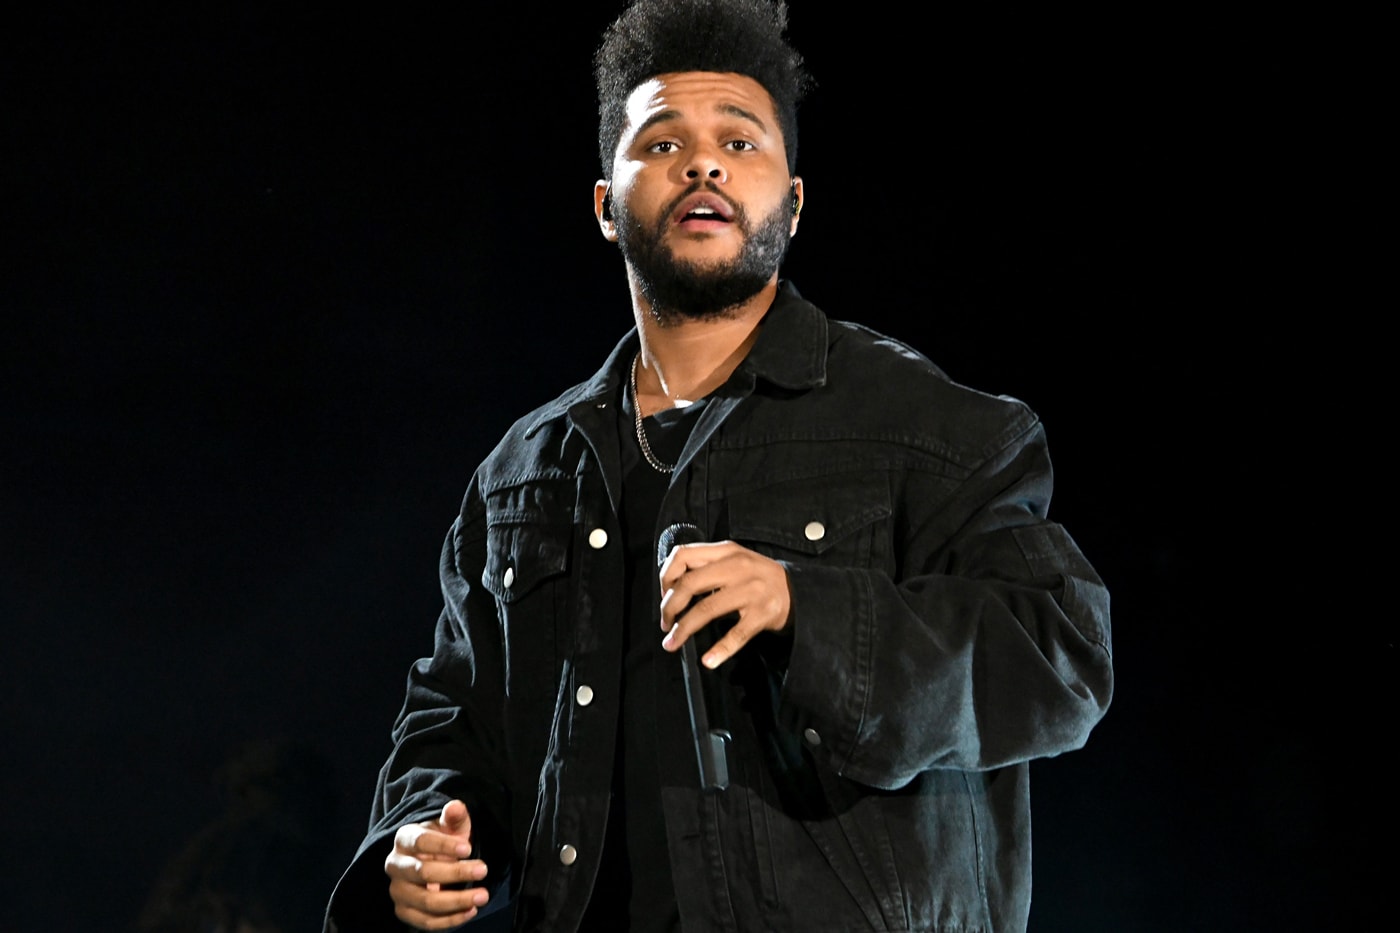 the-weeknd-bryson-tiller-rambo-remix-live-debut